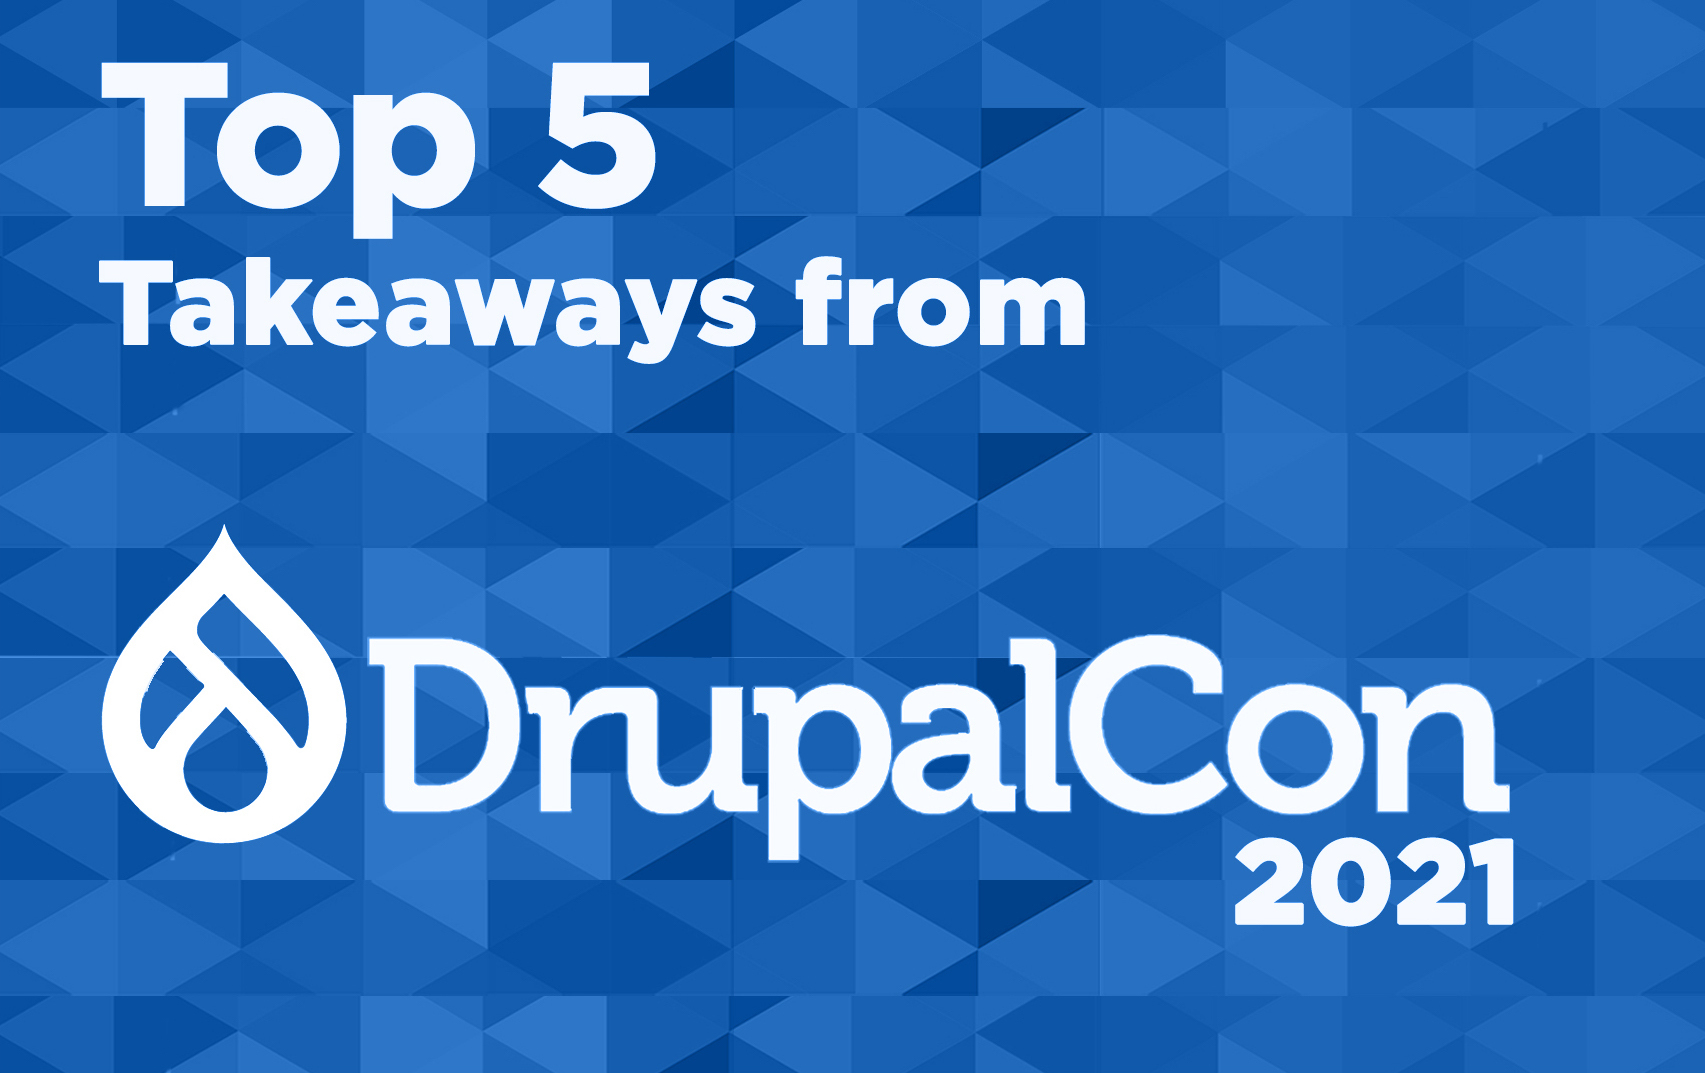 DrupalCon-2021-highlights-and-key-takeaways